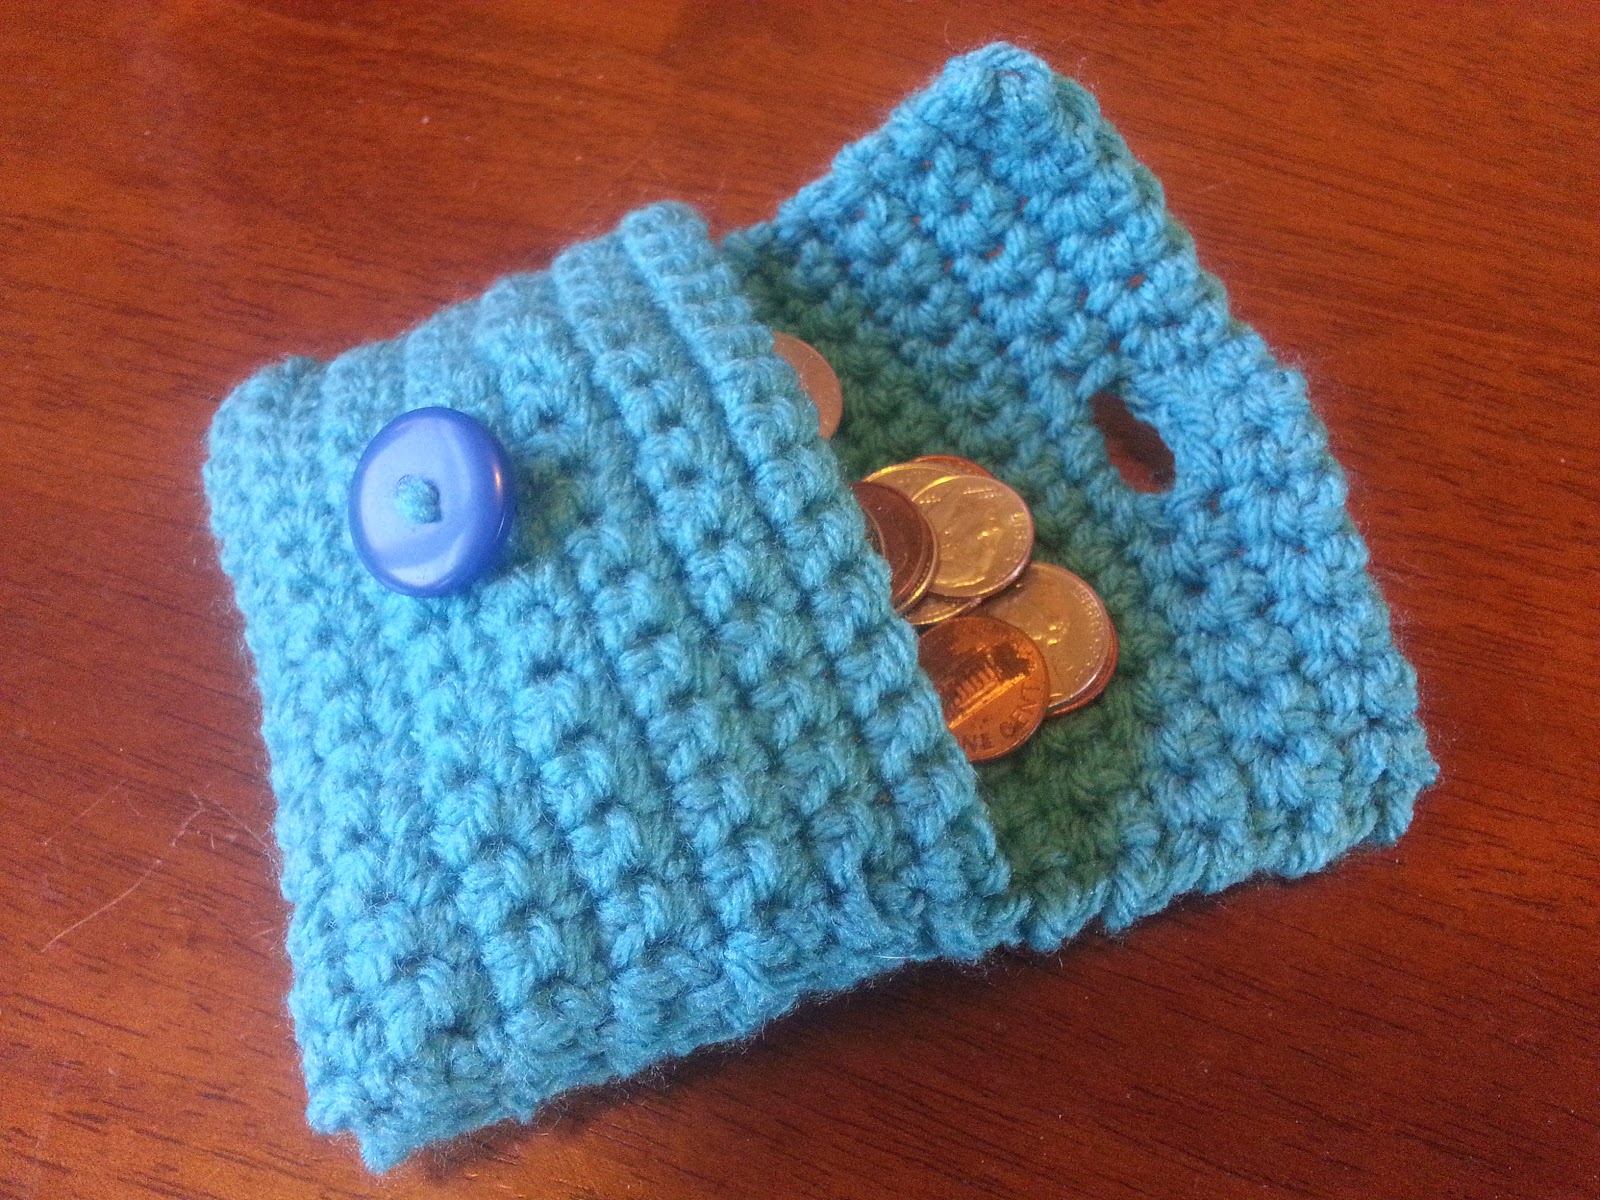 Collection of Crochet Stitches: Pattern: Easy Coin Purse/Wallet